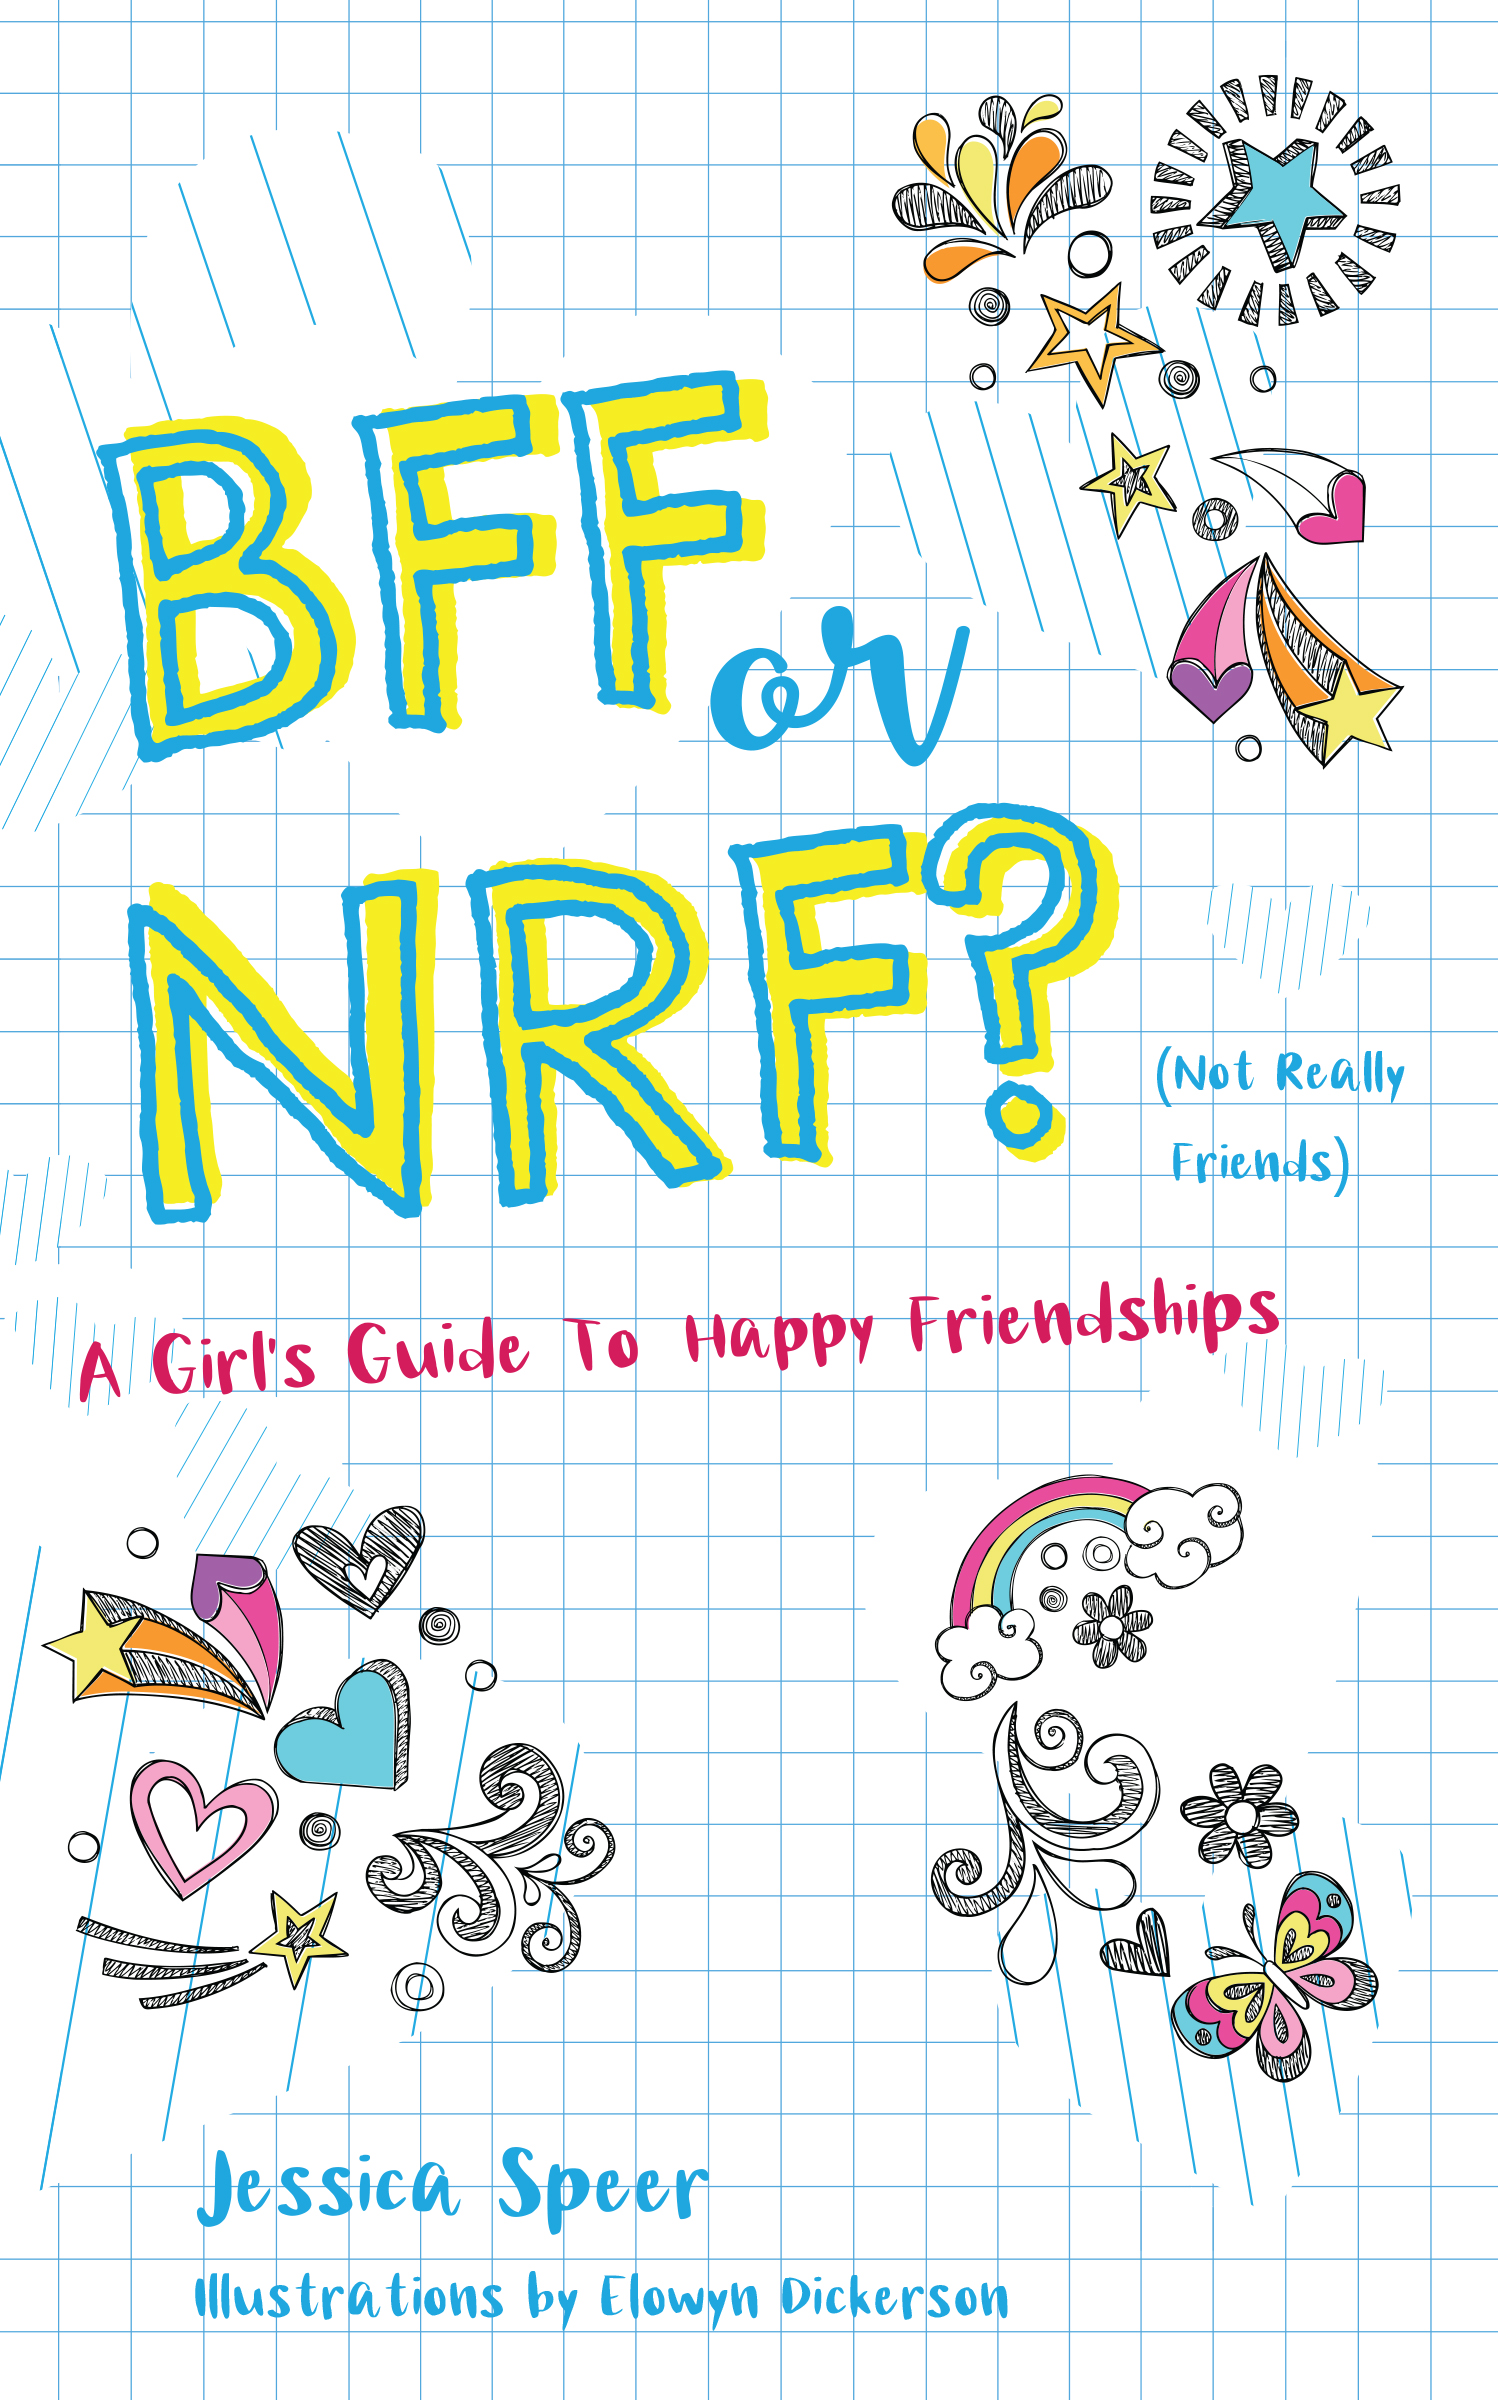 BFF or NRF (Not Really Friends)